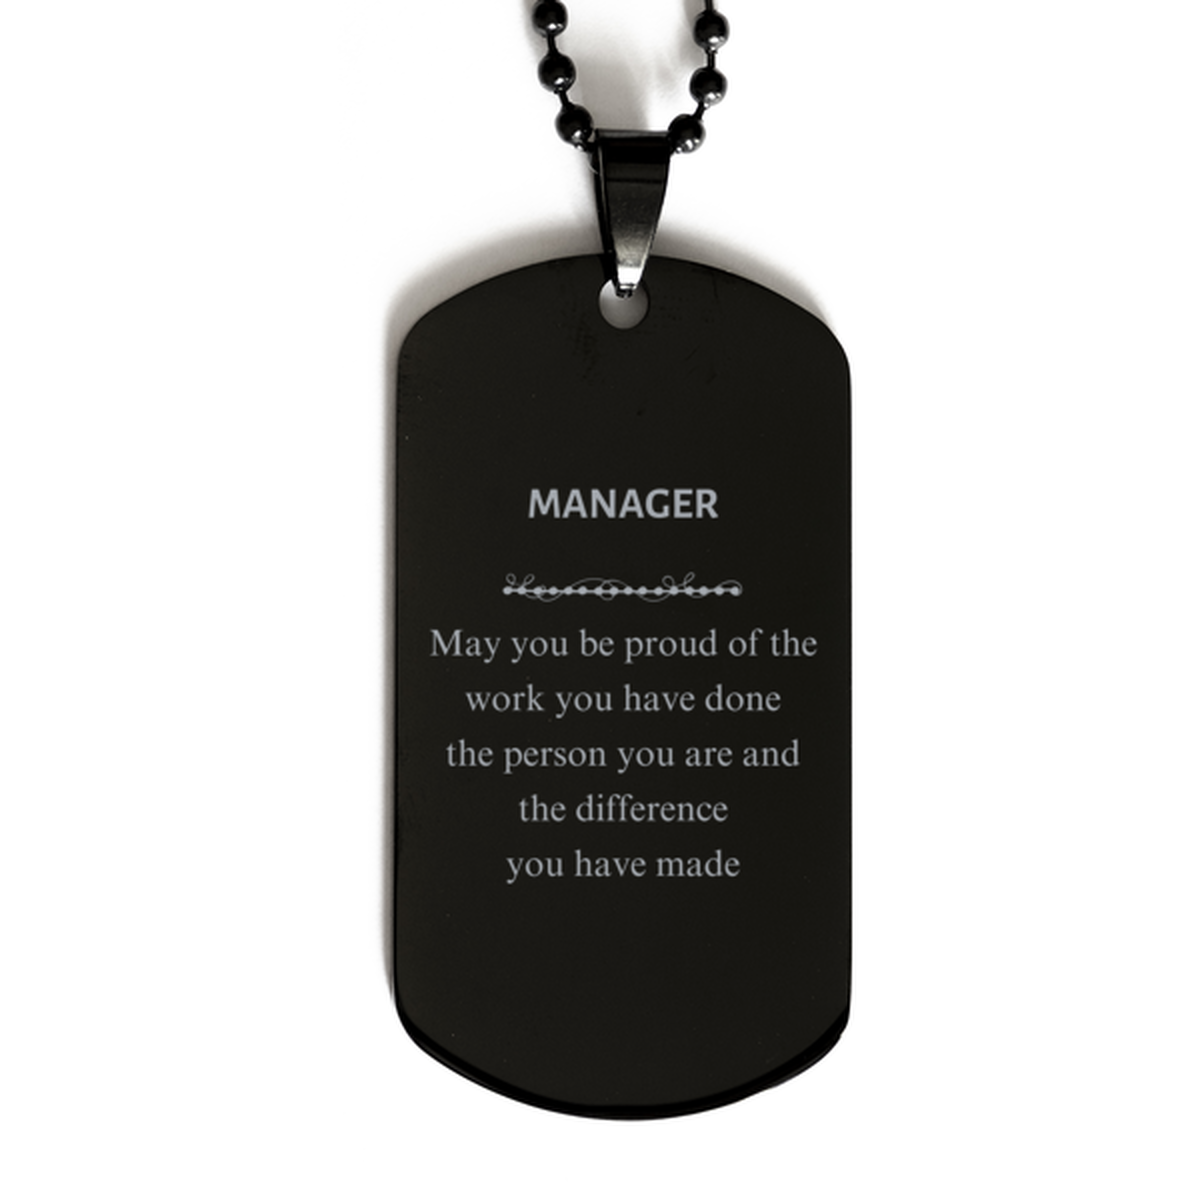 Manager May you be proud of the work you have done, Retirement Manager Black Dog Tag for Colleague Appreciation Gifts Amazing for Manager